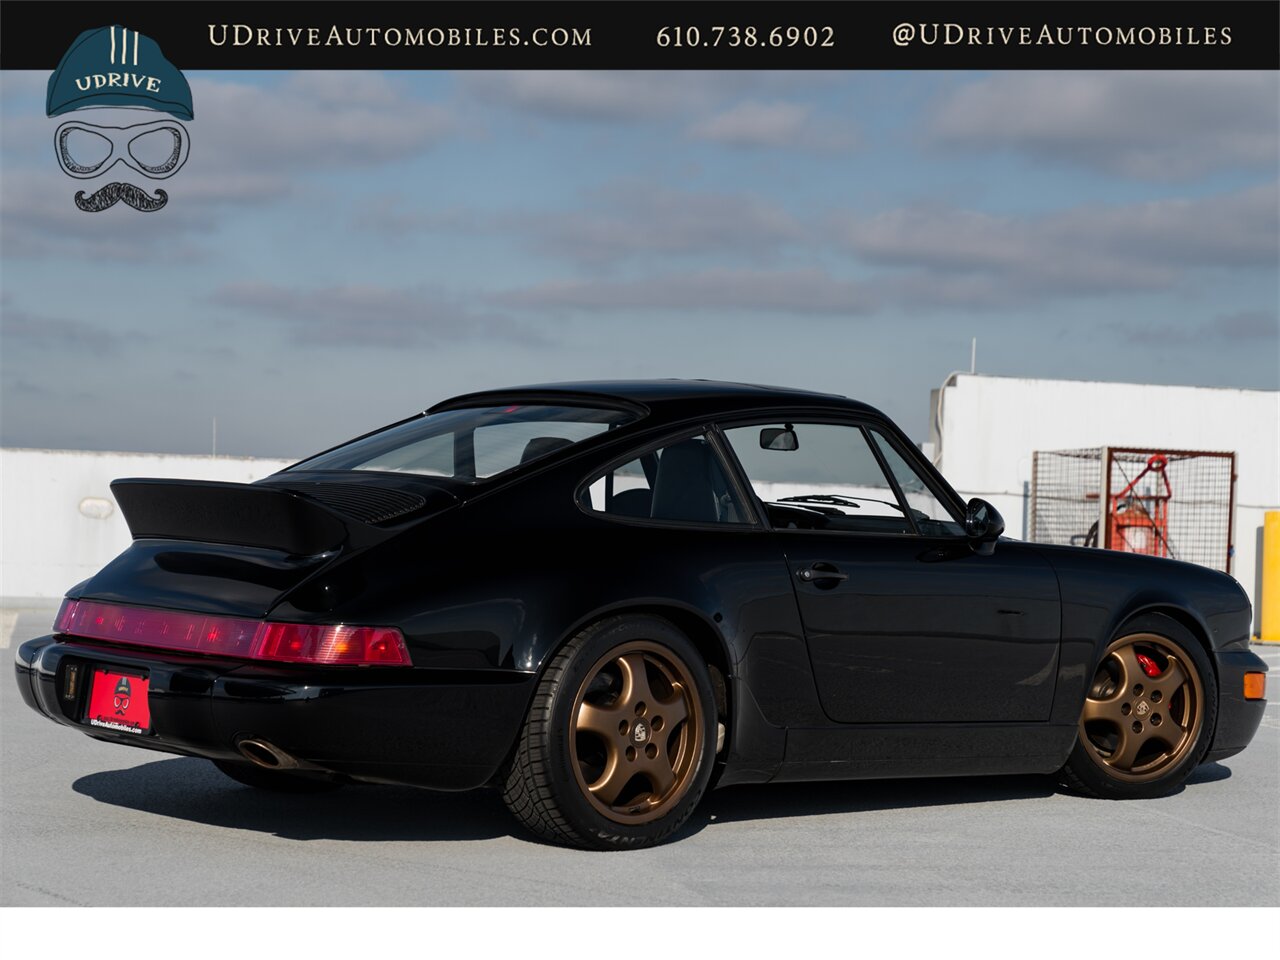 1989 Porsche 911 C4  964 Carrera 4 C4 5 Speed Manual $33k in Recent Service History - Photo 2 - West Chester, PA 19382